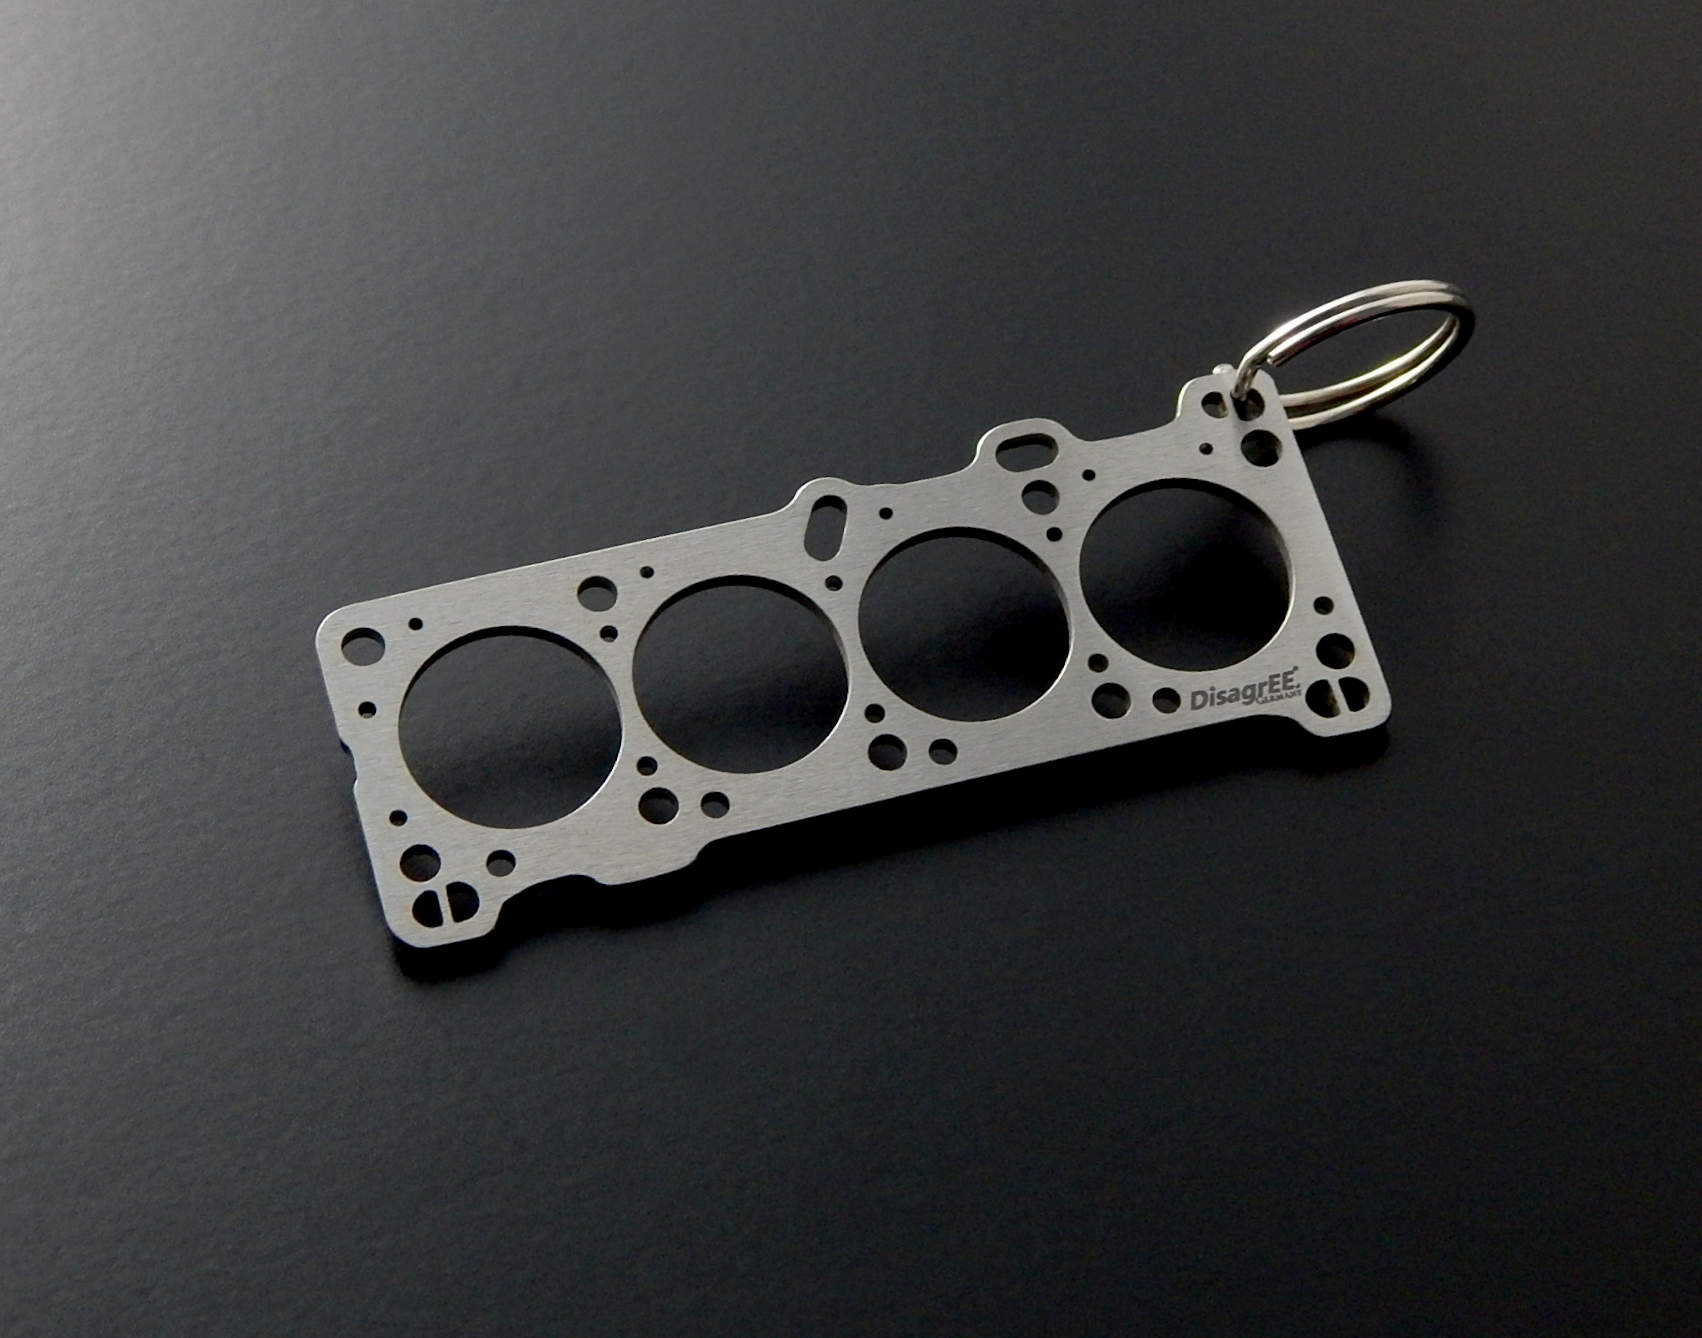 Miniature of a Head Gasket for Alfa Romeo Busso V6 Keychain Stainless Steel  brushed – DisagrEE